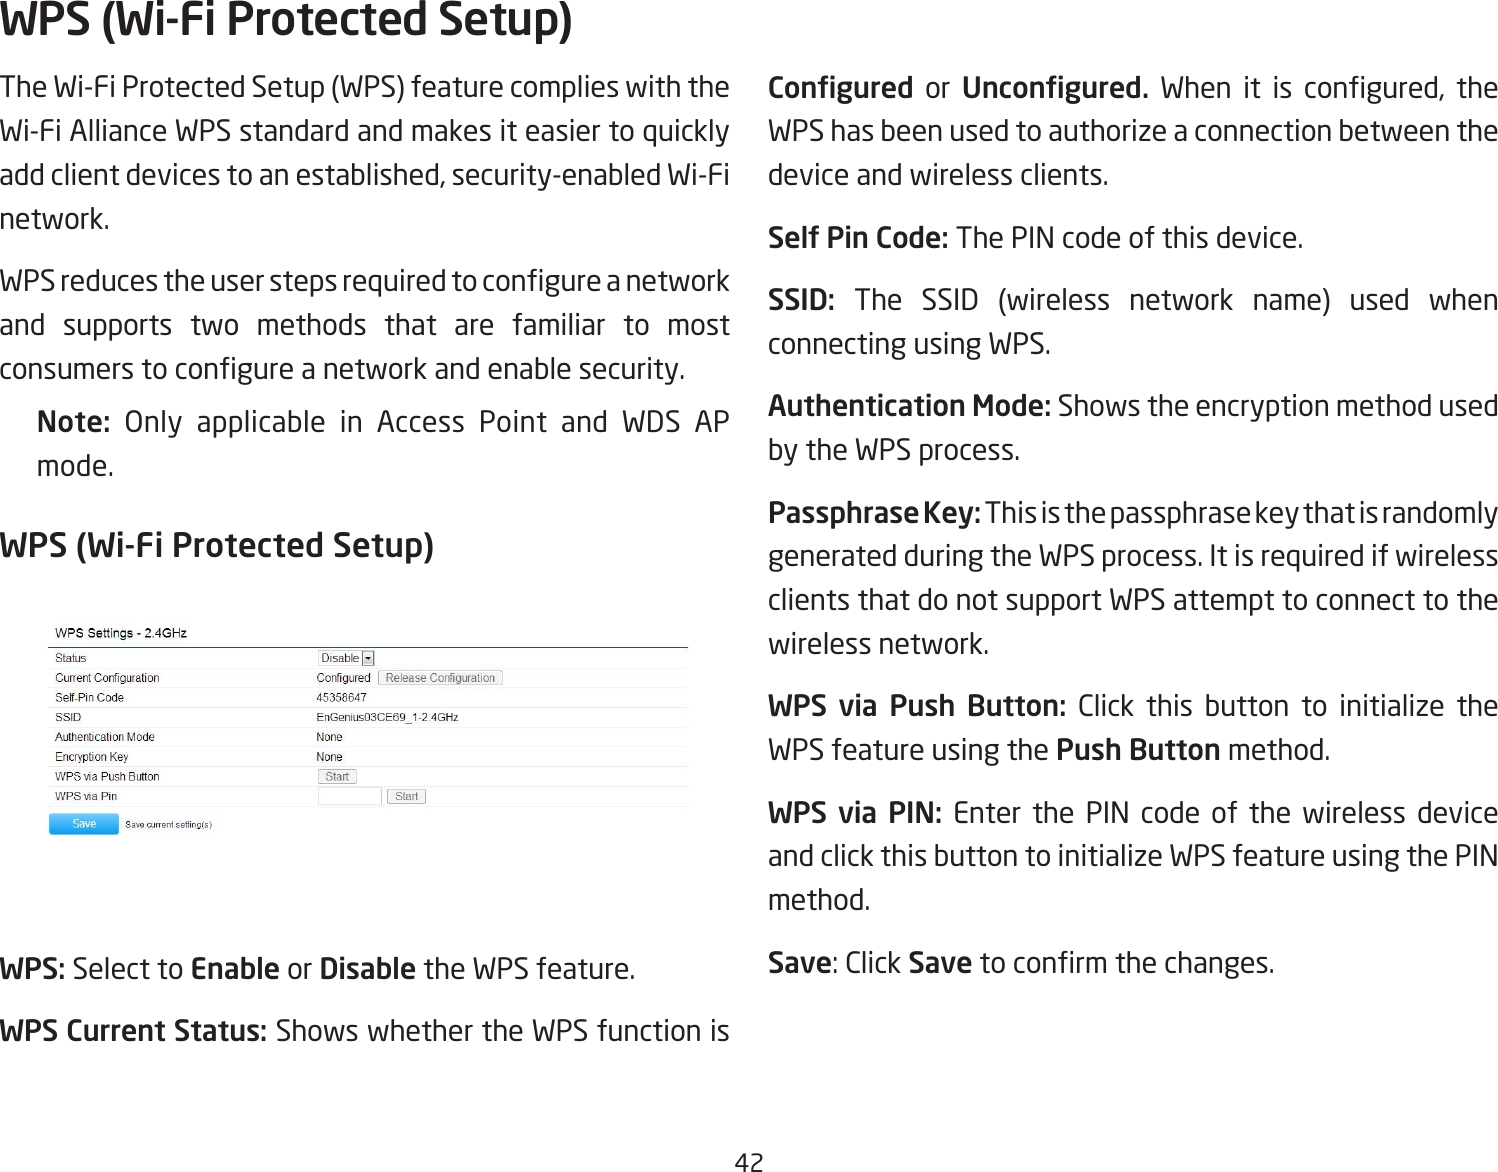 42The Wi-Fi Protected Setup (WPS) feature complies with the Wi-Fi Alliance WPS standard and makes it easier to quickly add client devices to an established, security-enabled Wi-Fi network. WPSreducestheuserstepsrequiredtocongureanetworkand supports two methods that are familiar to most consumerstocongureanetworkandenablesecurity.Note:  Only applicable in Access Point and WDS AP mode.WPS (Wi-Fi Protected Setup)WPS: Select to Enable or Disable the WPS feature.WPS Current Status: Shows whether the WPS function is Congured  or  Uncongured. When it is congured, theWPS has been used to authorize a connection between the device and wireless clients.Self Pin Code: The PIN code of this device.SSID:  The SSID (wireless network name) used when connecting using WPS.Authentication Mode: Shows the encryption method used by the WPS process.Passphrase Key: This is the passphrase key that is randomly generated during the WPS process. It is required if wireless clients that do not support WPS attempt to connect to the wireless network.WPS  via  Push  Button: Click this button to initialize the WPS feature using the Push Button method.WPS  via  PIN: Enter the PIN code of the wireless device and click this button to initialize WPS feature using the PIN method.Save:ClickSavetoconrmthechanges.WPS (Wi-Fi Protected Setup)